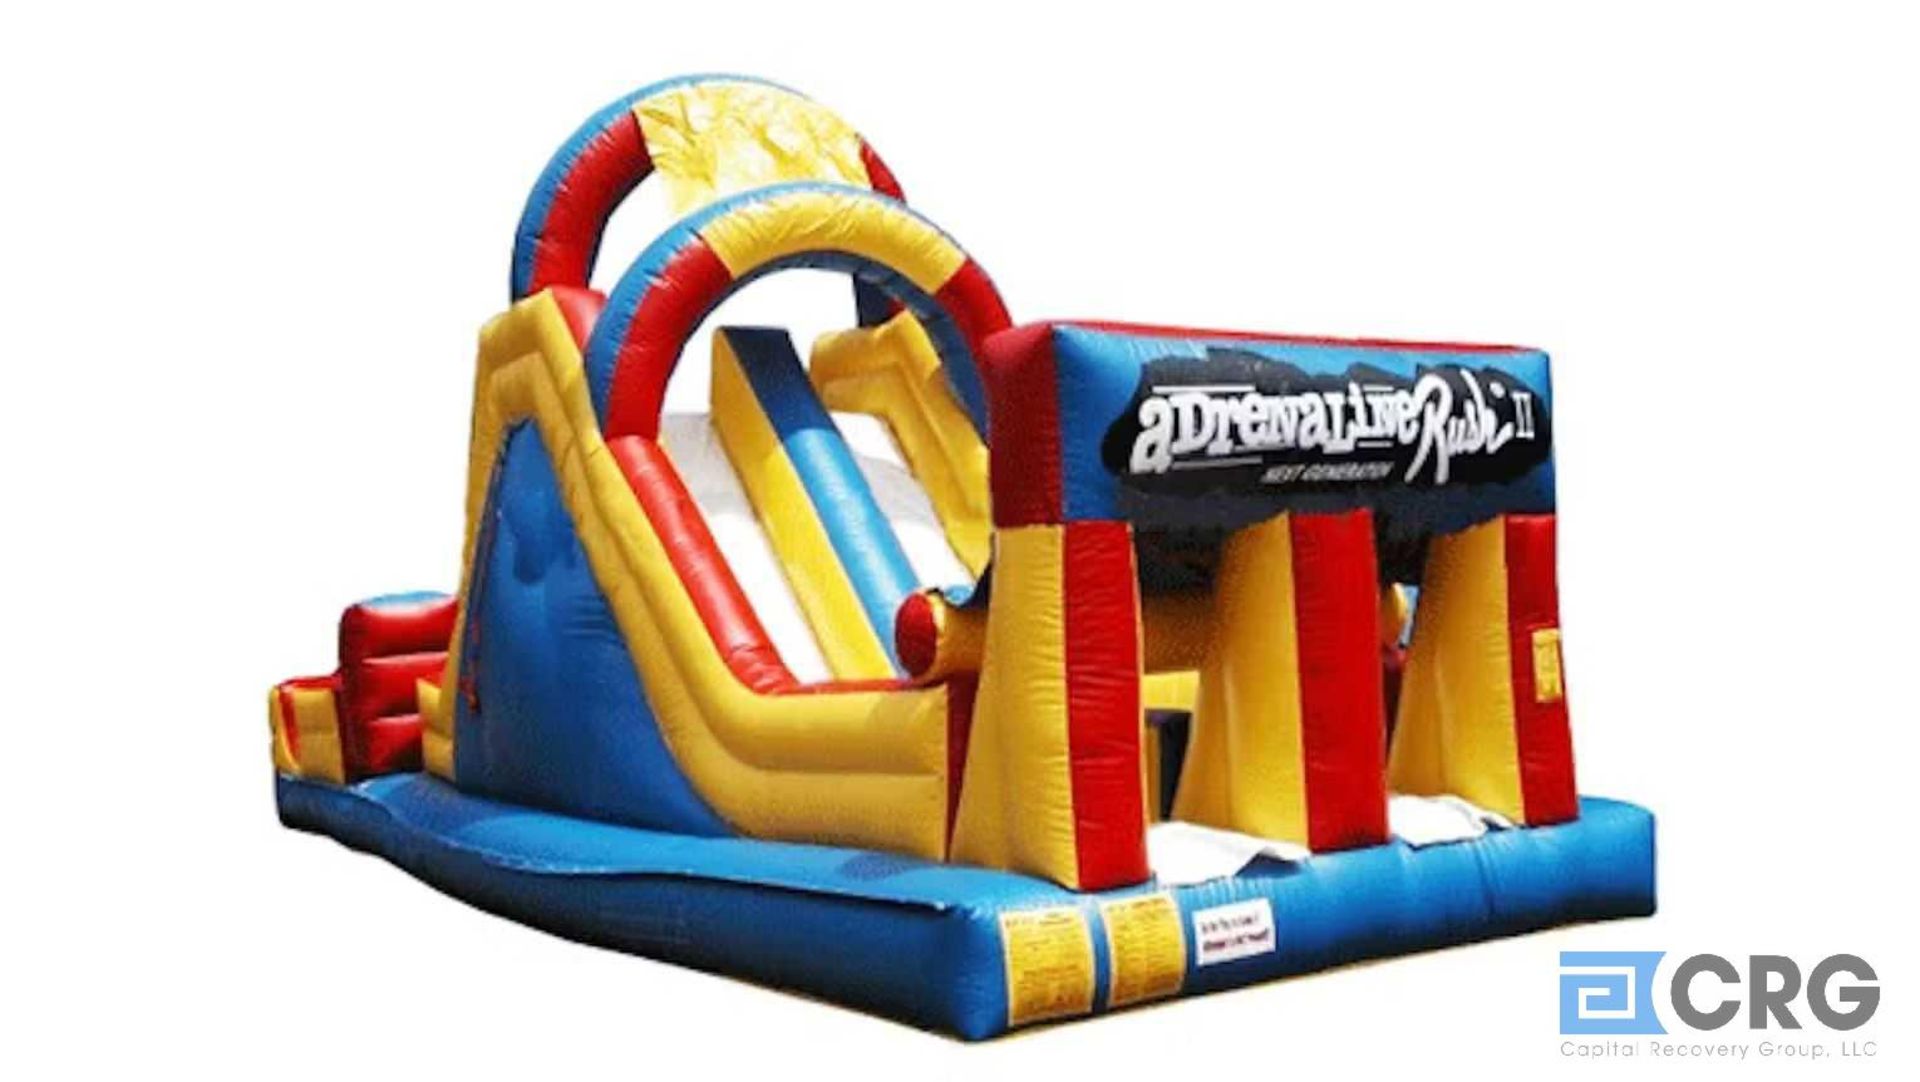 Adrenaline Rush Climb and Slide Inflatable - Image 2 of 2